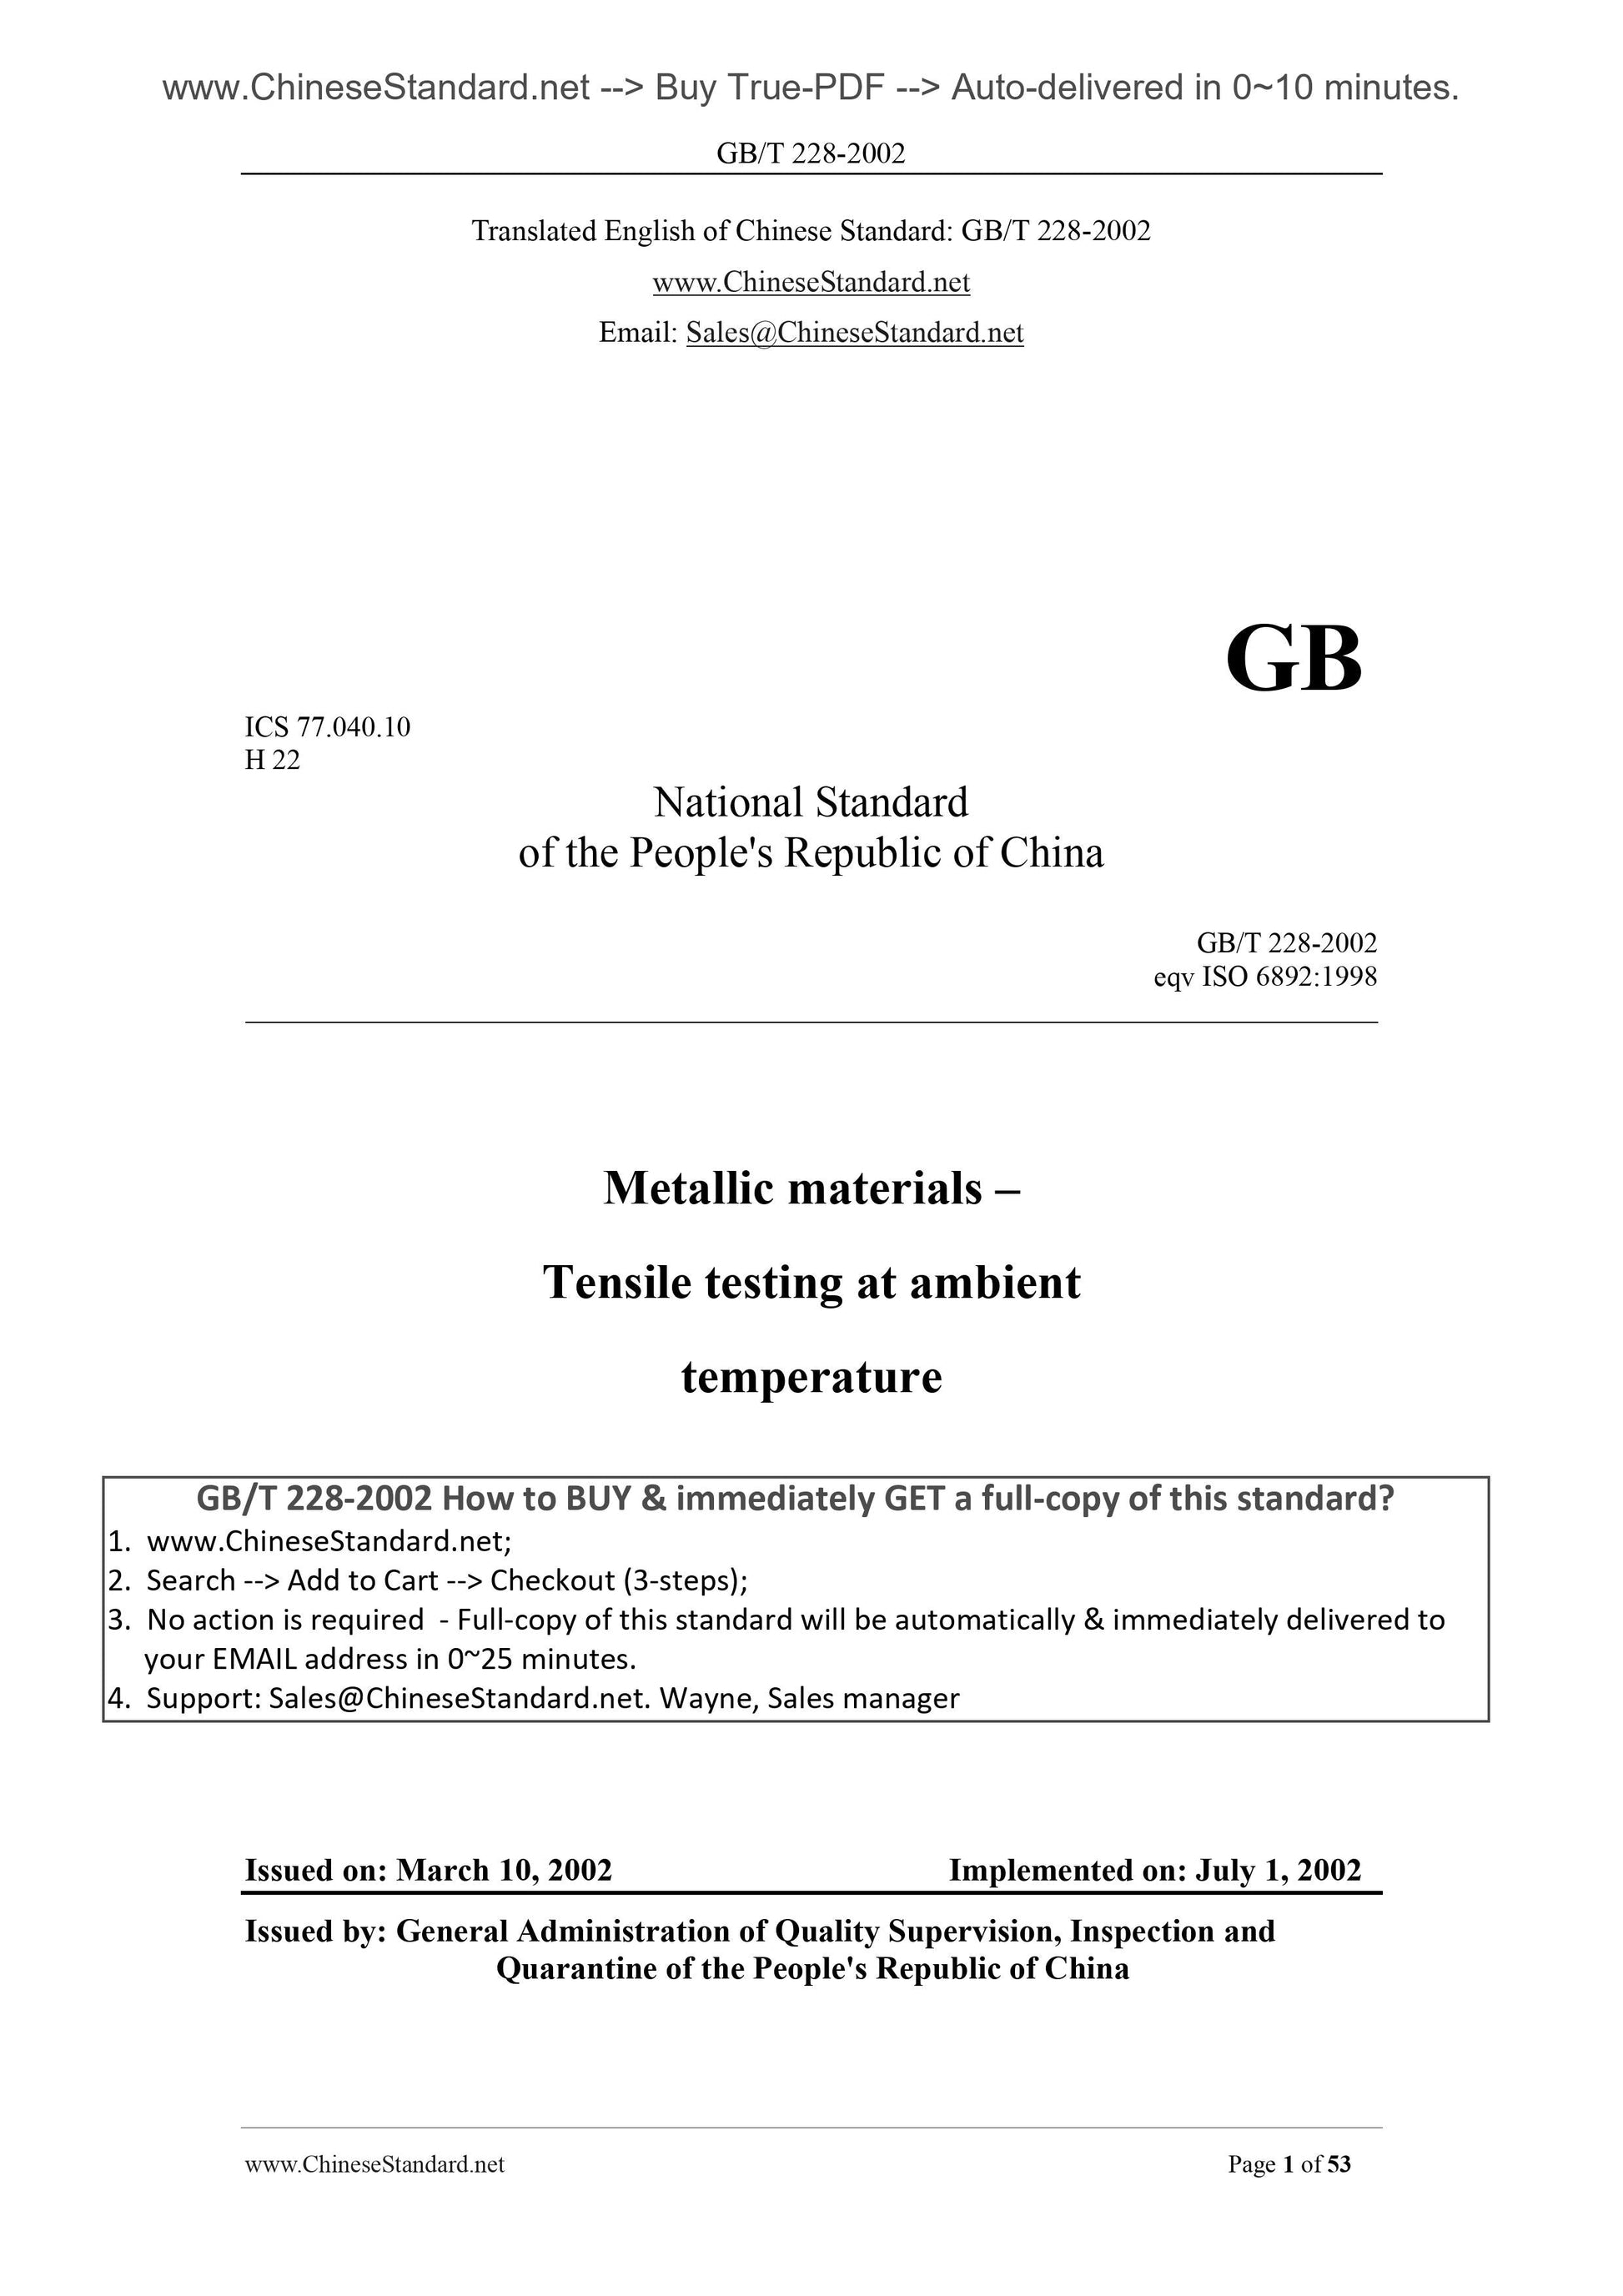 GB/T 228-2002 Page 1